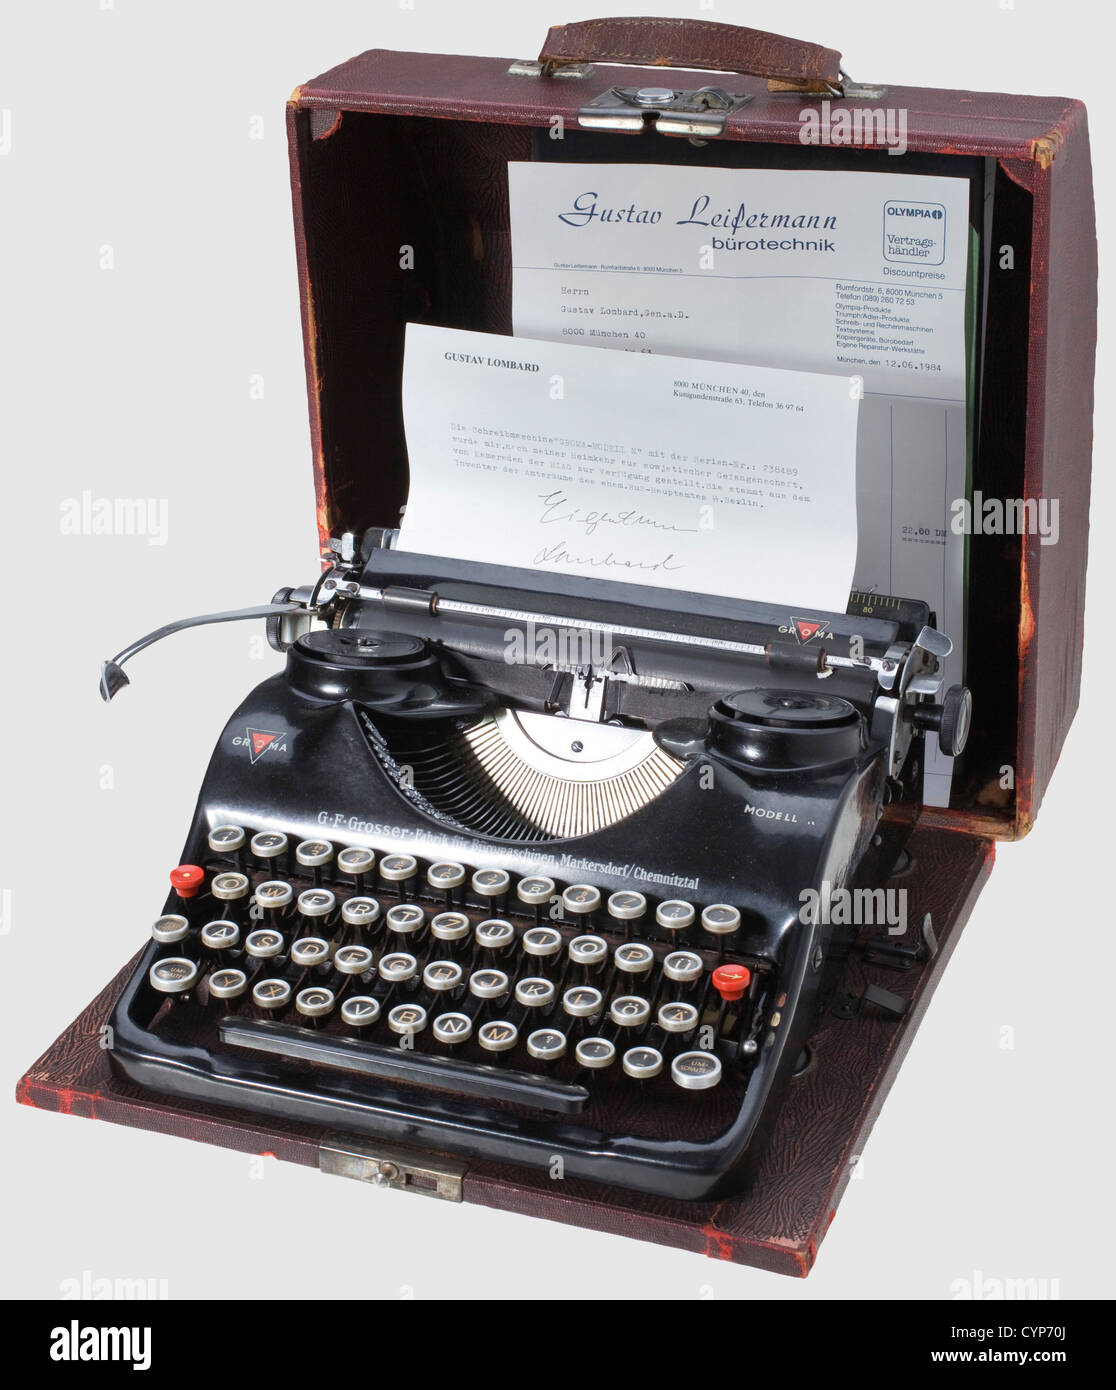 A Groma typewriter model 'N' from Race and Settlement Office SS,Functioning typewriter with 'SS' symbol on number key '3'.In a slightly damaged box covered with dark red artificial leather(leather strap handle torn).The base of box with label 'The Head of Race and Settlement Office SS Richard Hildebrandt' with serial number and SS reg.no.as well as stamp 'Property of SS Office for Economy and Administration'(quotes transl.).The typewriter was a present from HIAG to Gustav Lombard,former SS brigade leader and ,Additional-Rights-Clearences-Not Available Stock Photo